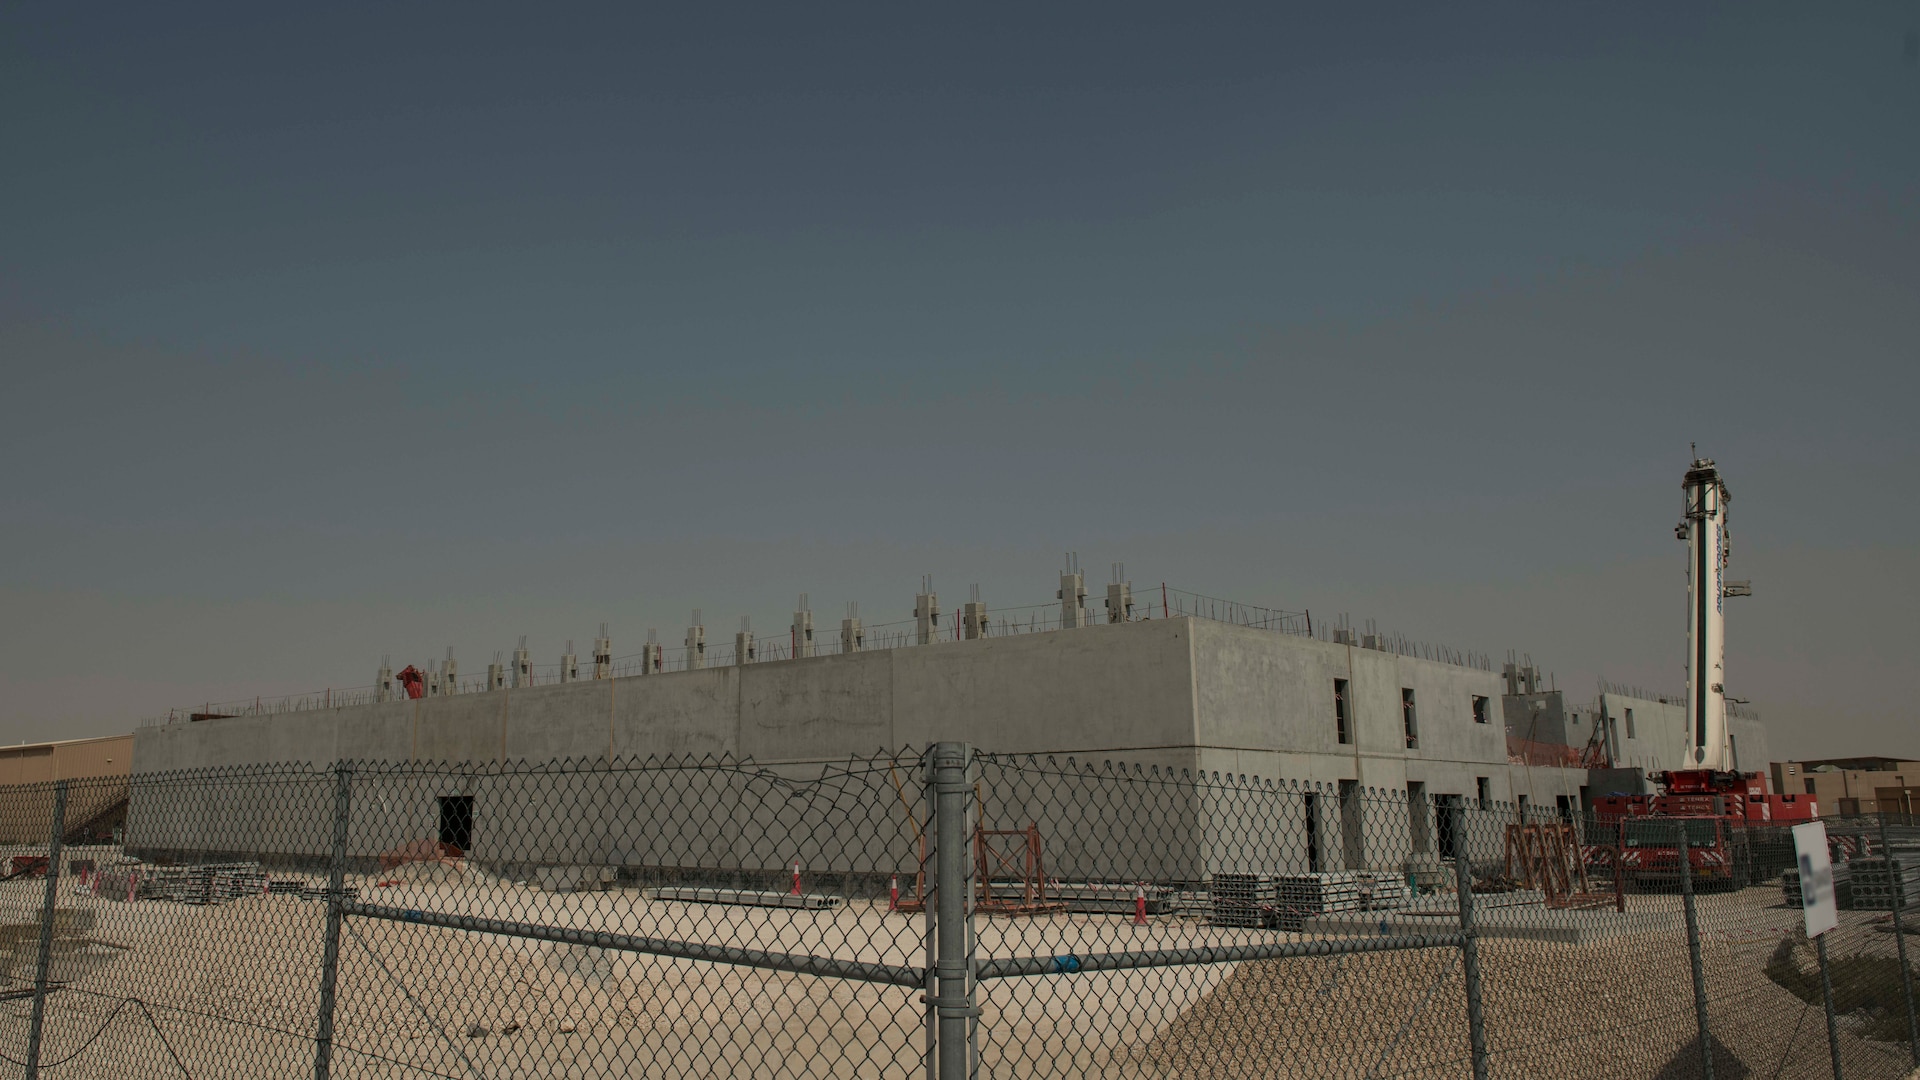 The construction of 10 state-of-the-art dormitories, two dining facilities, and four mission support facilities continues at Al Udeid Air Base, Qatar, May 29, 2020.